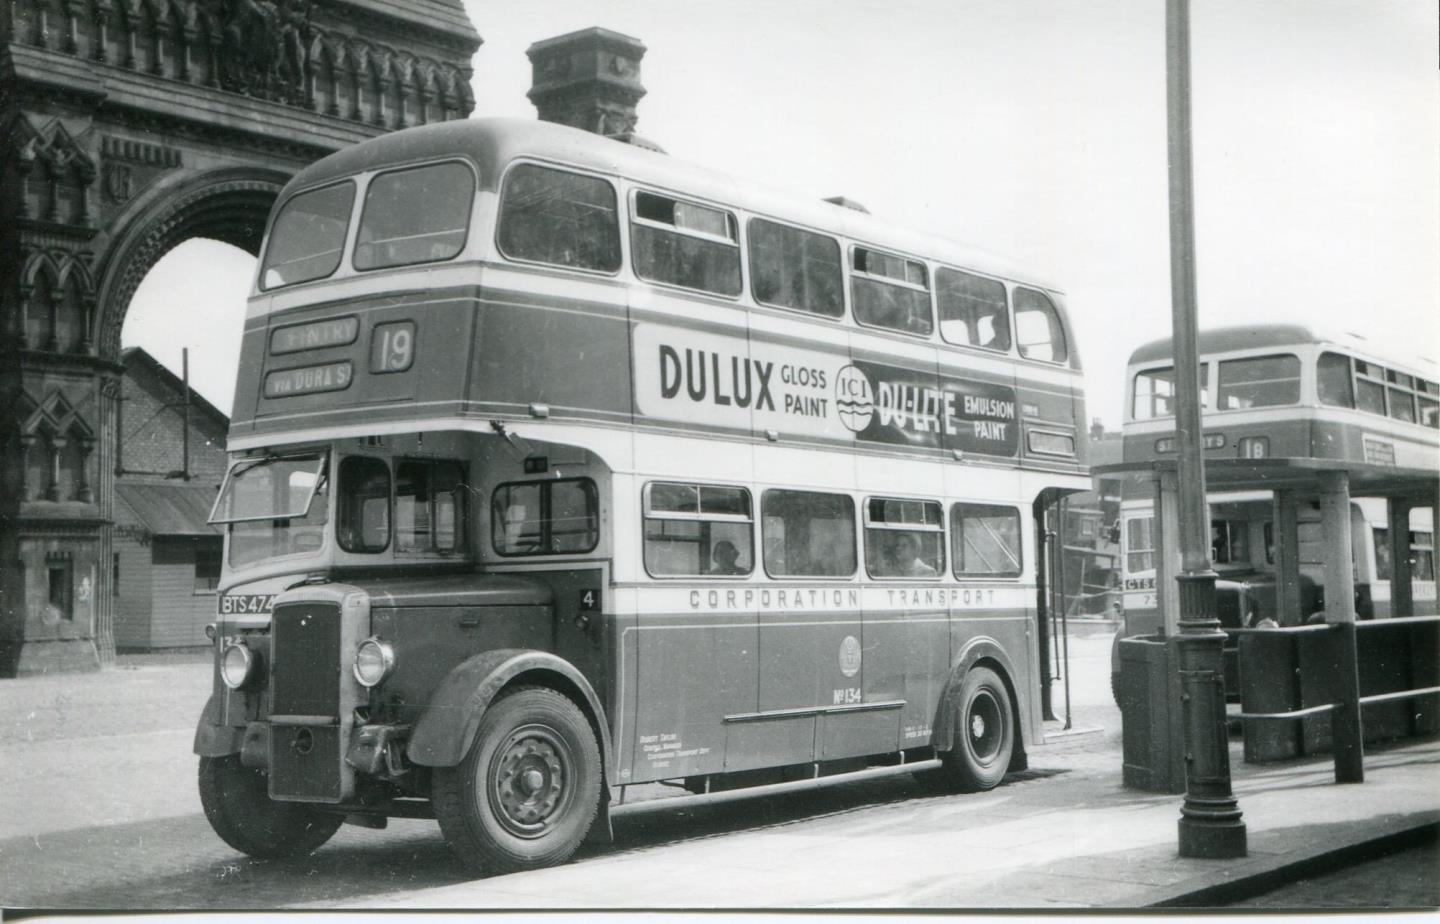 A bus waiting next to the Royal Arch, which was demolished in the 1960s.